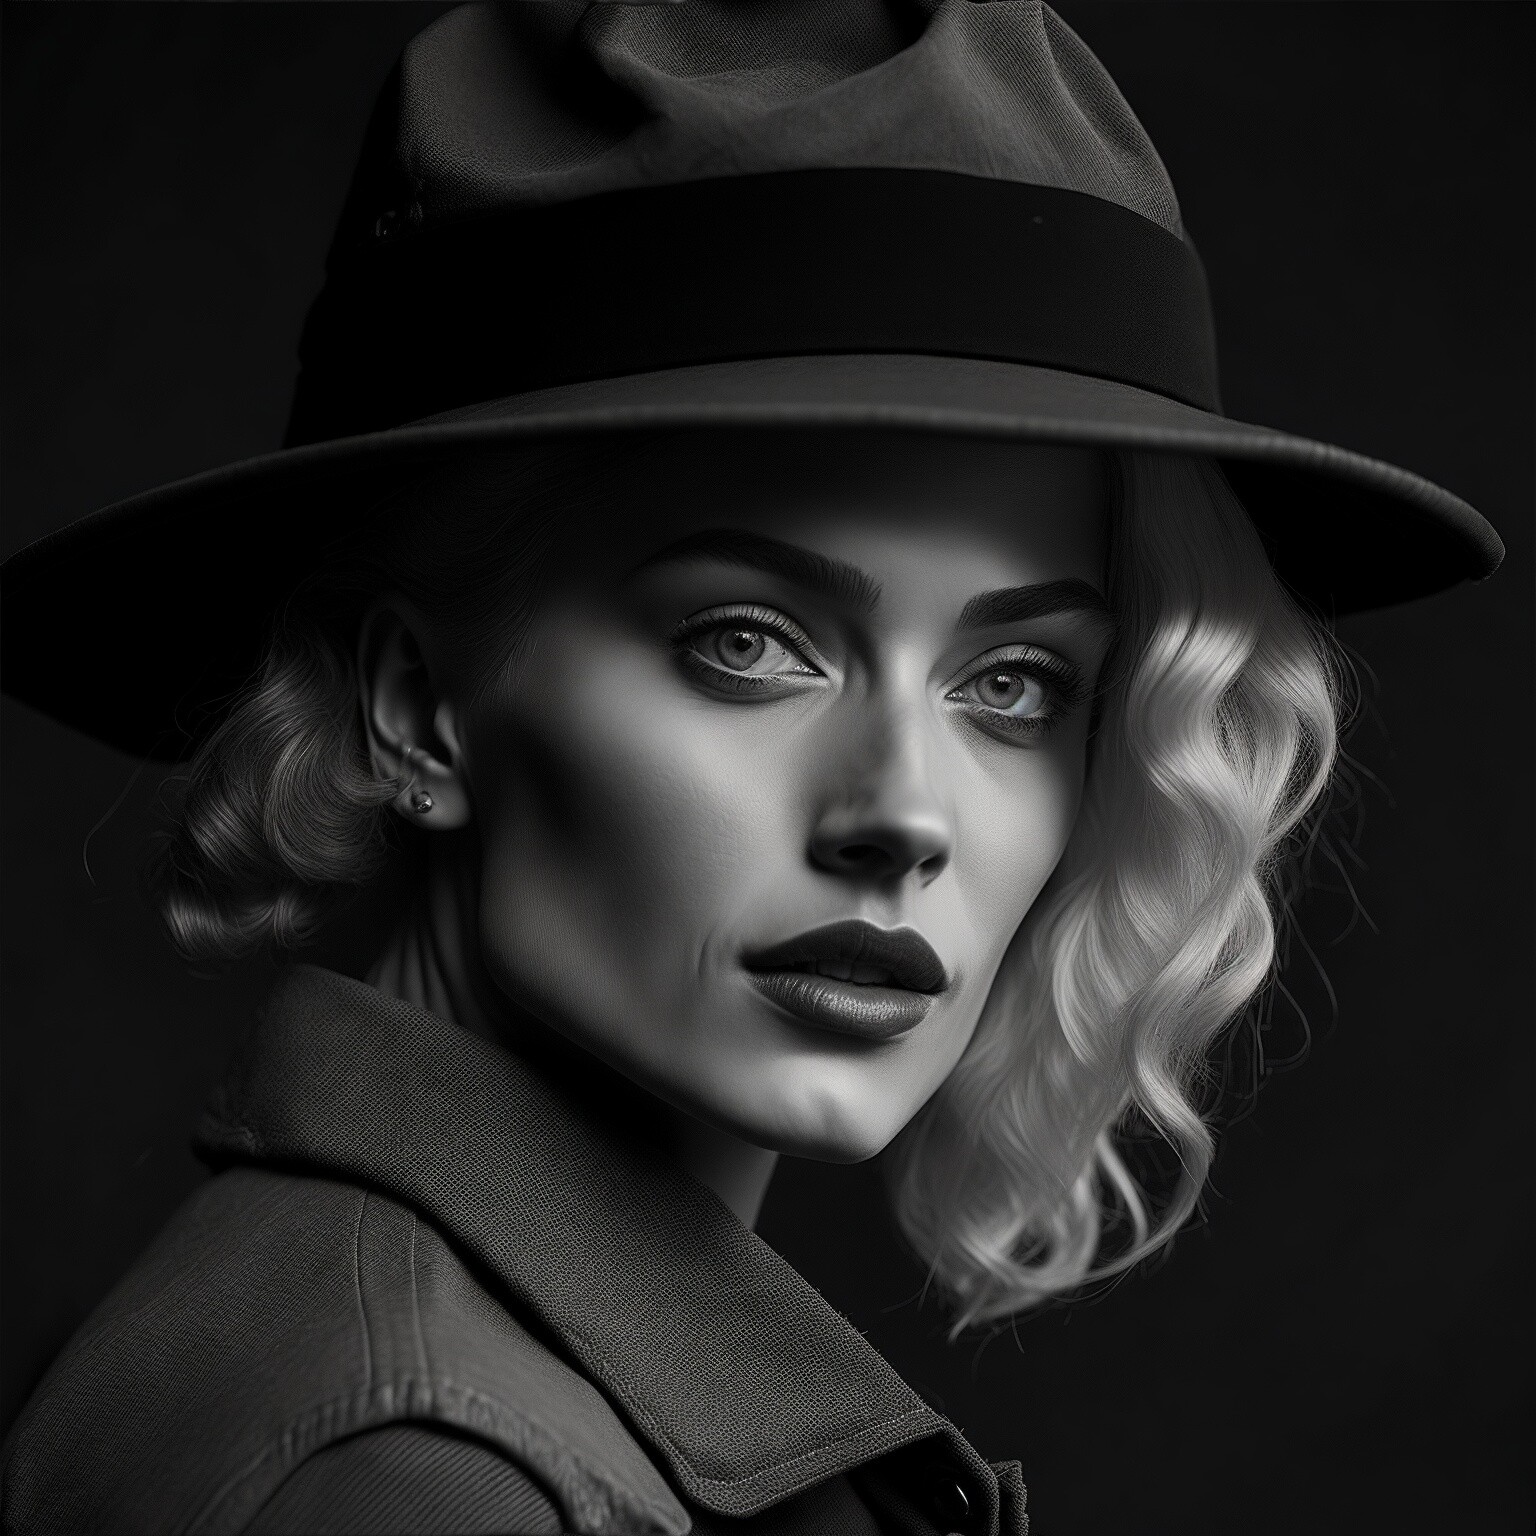 ArtStation - Photography black and white woman wearing hat